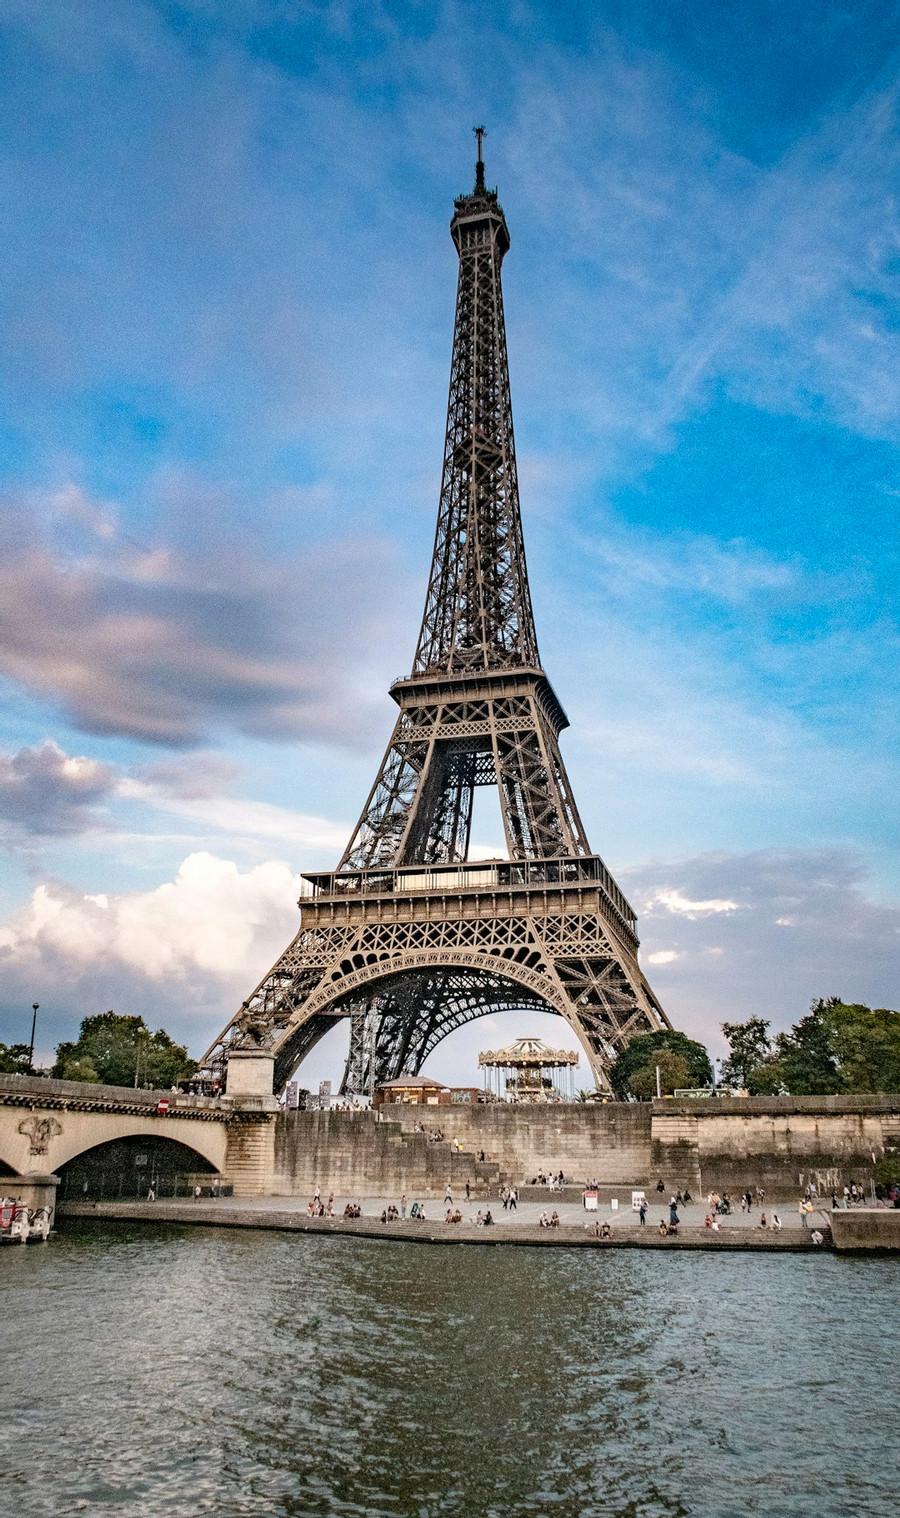 The Eiffel Tower Can Be 15 cm Taller in the Summer